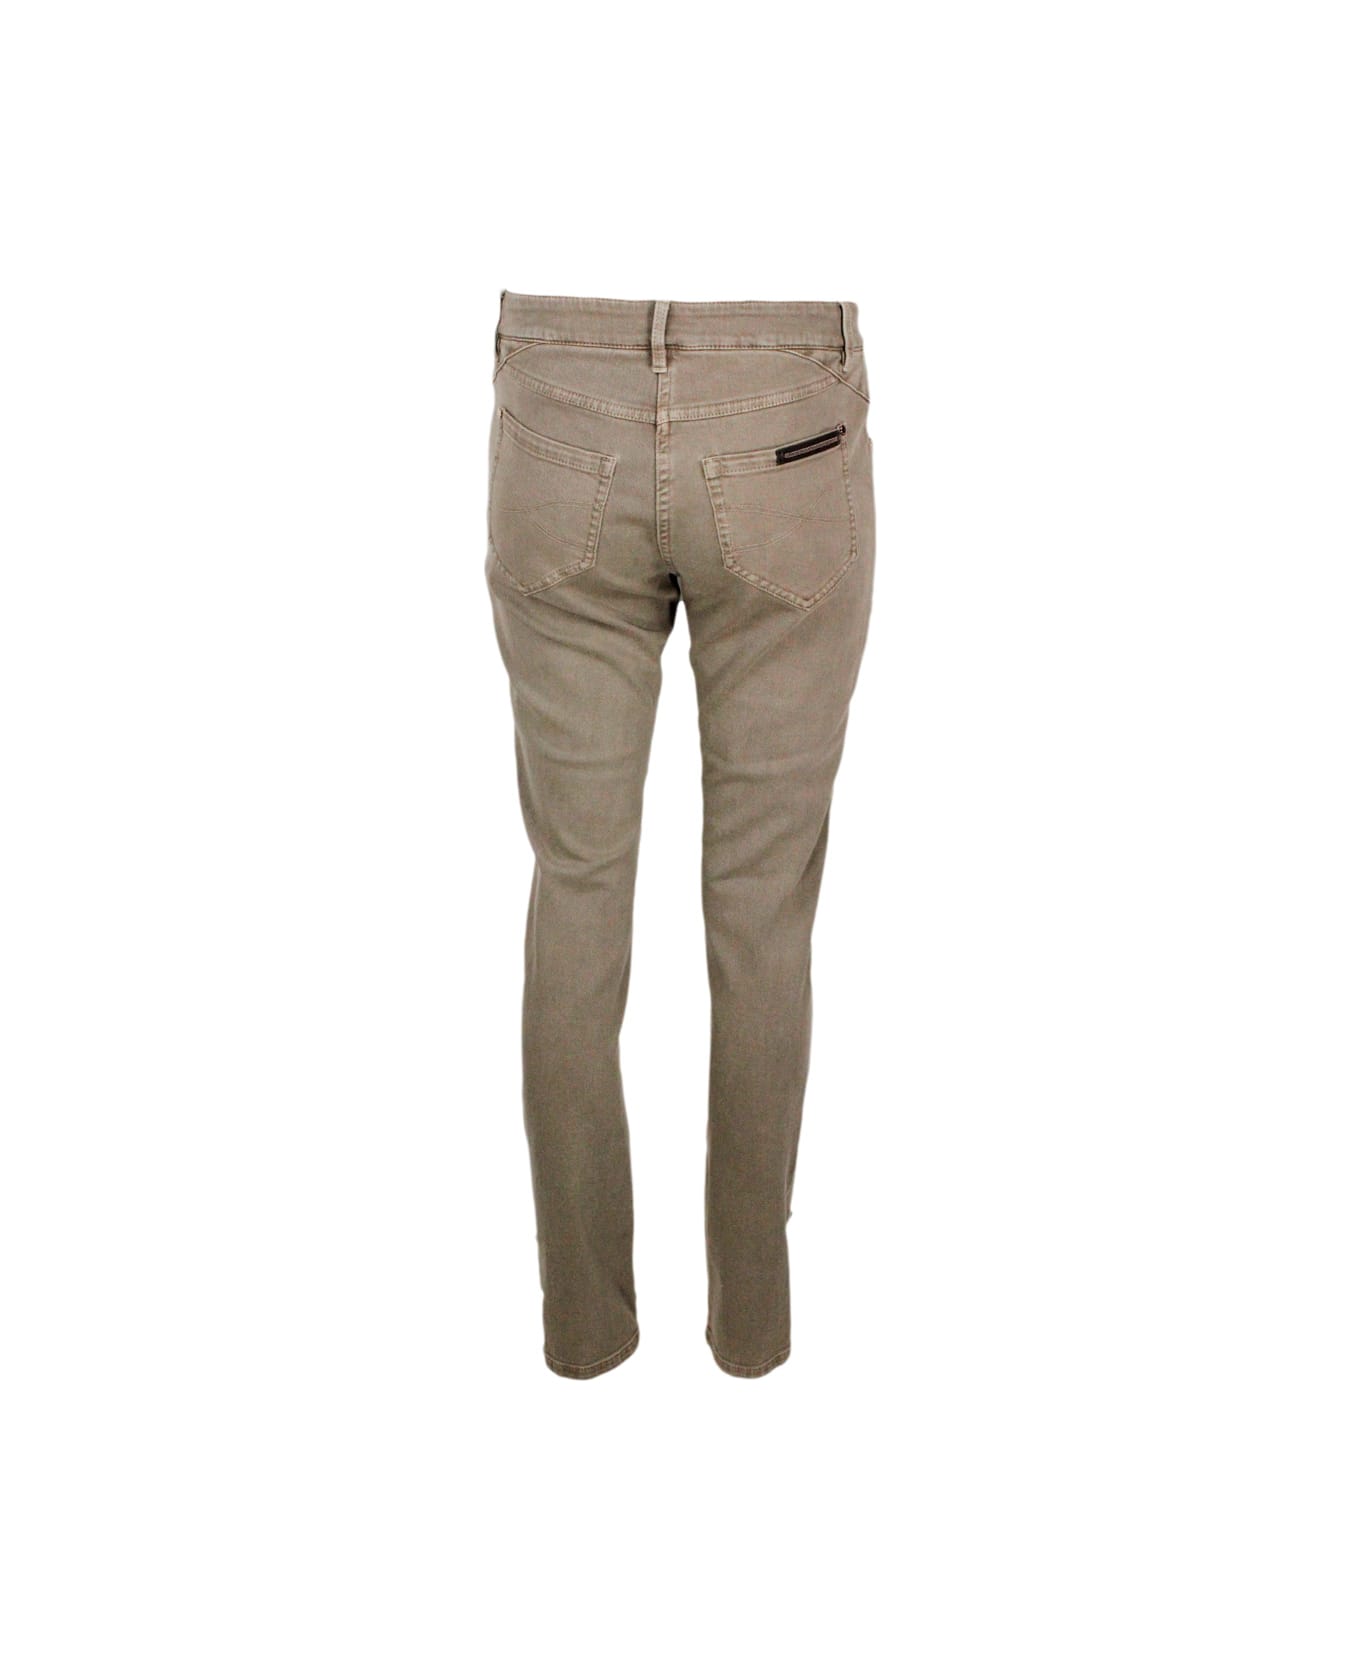 Brunello Cucinelli Five-pocket Garment-dyed Stretch Denim Trousers - Taupe